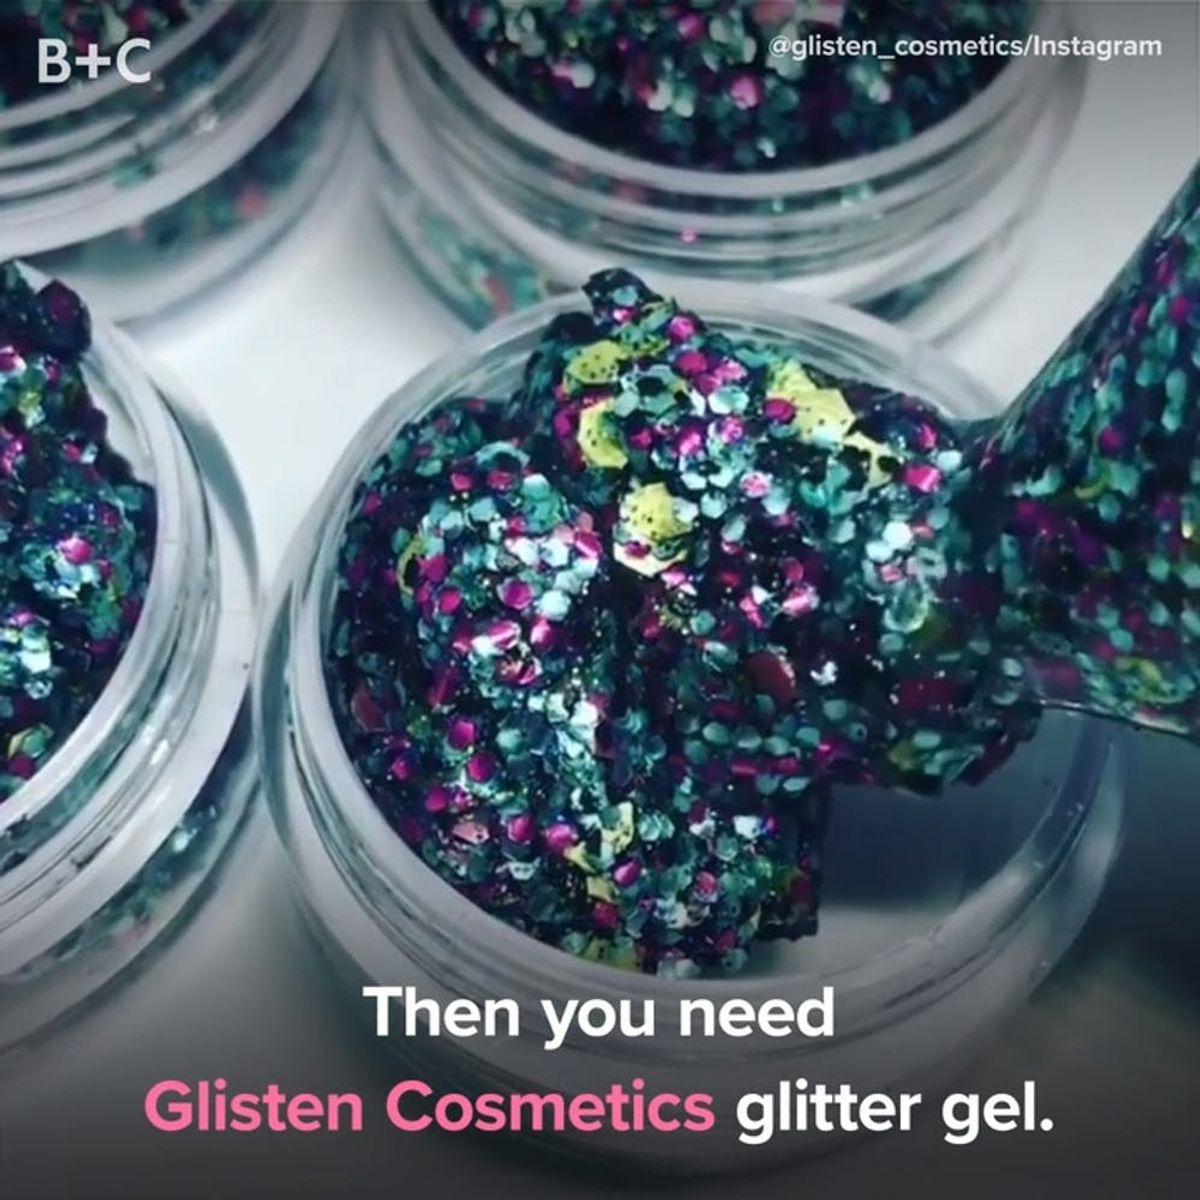 You NEED to Try This Biodegradable Glitter Gel Makeup